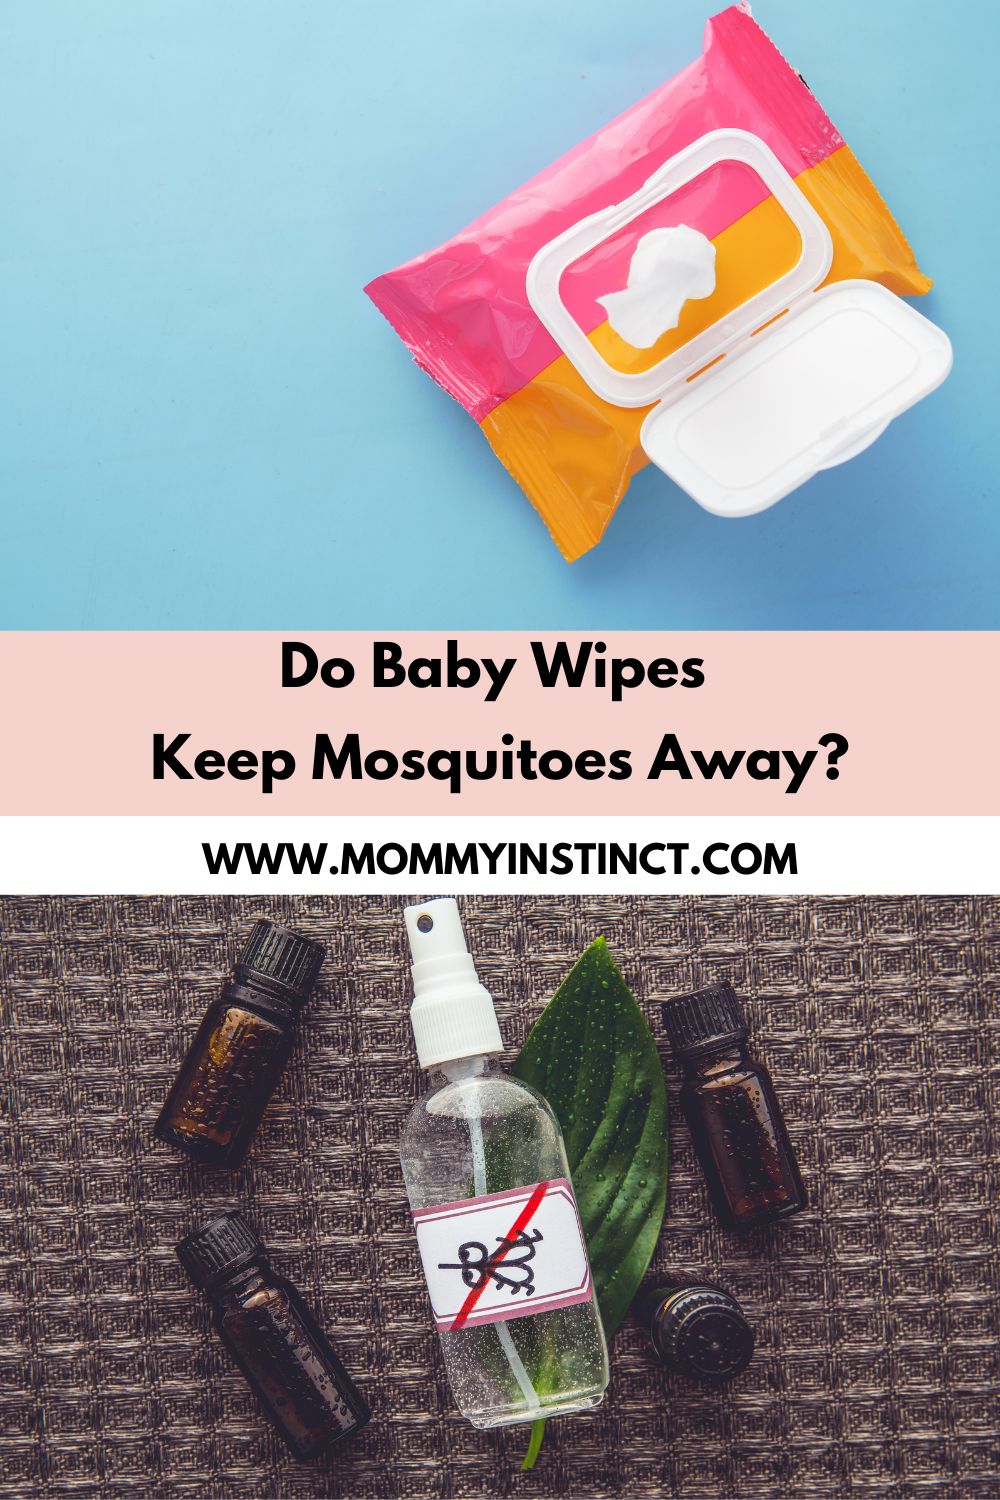 Do Baby Wipes Keep Mosquitoes Away